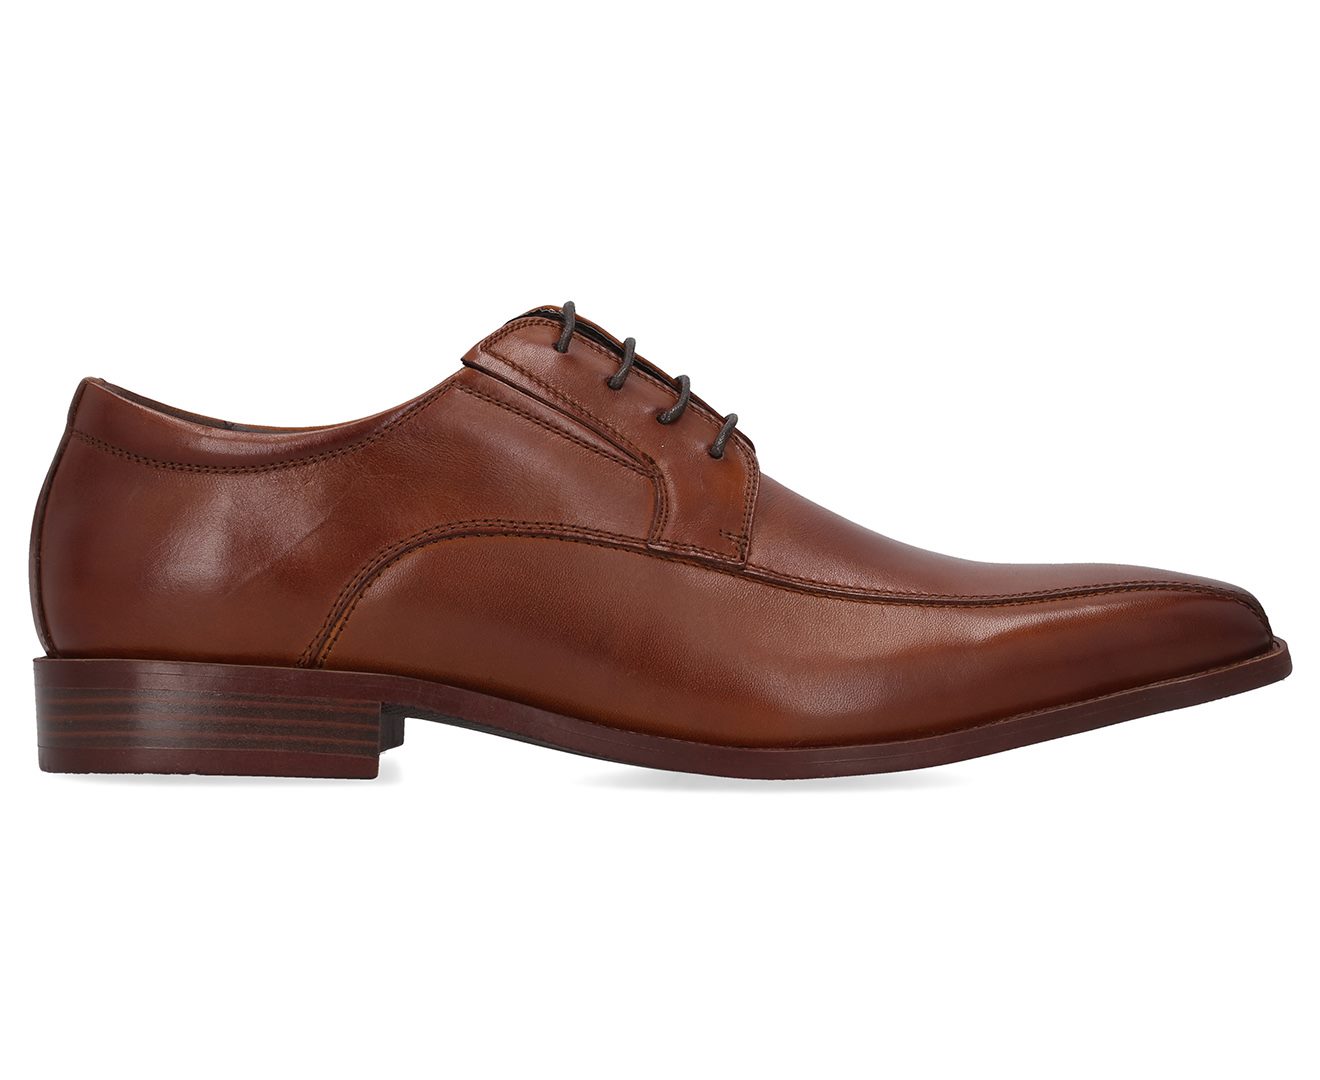 Dress Shoe Whisky in Brown Dress Shoes 